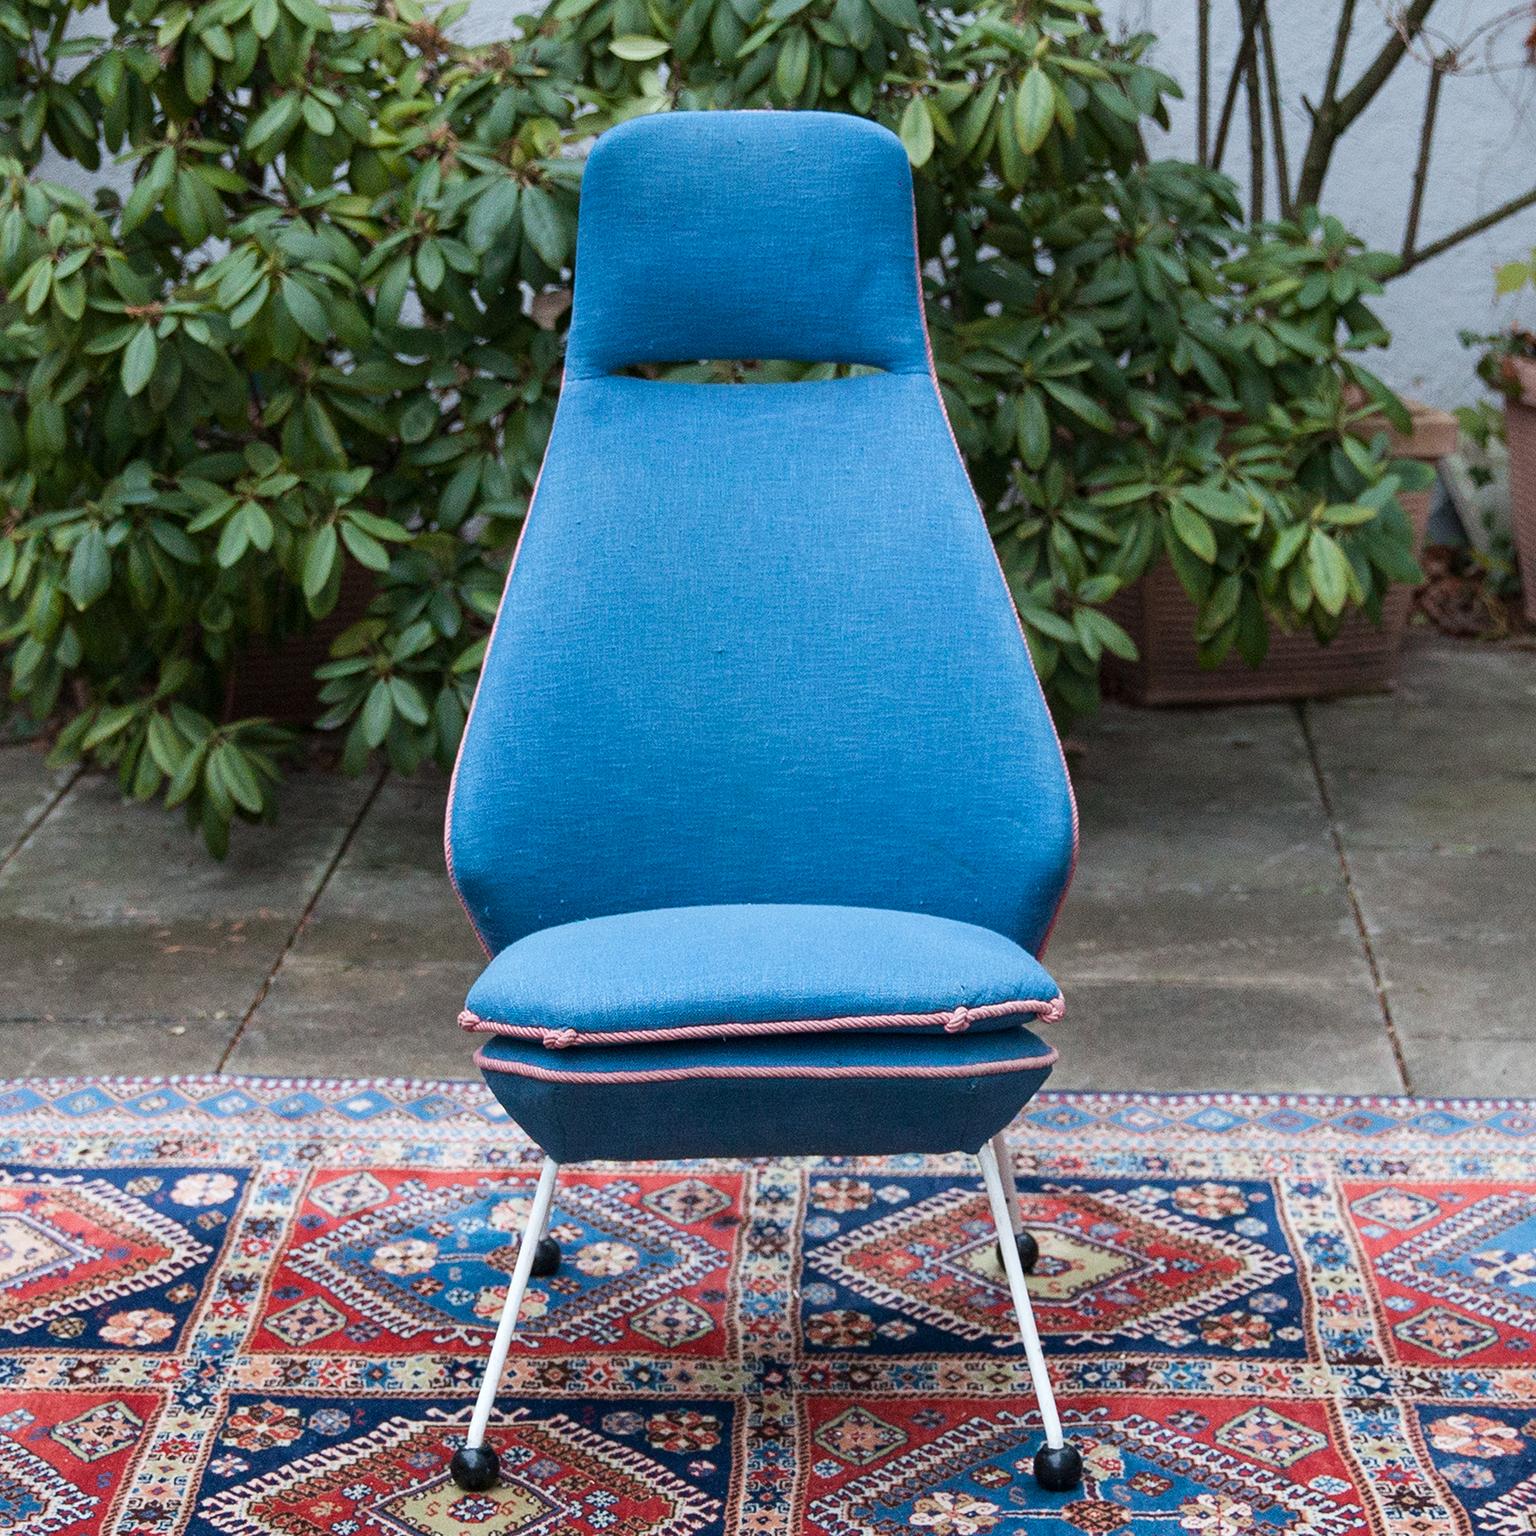 Typical spectacular design of 1950s, featuring a rounded open framework in white enameled solid iron with sculpted original blue fabric upholstery, the edges framed with a pink cord and original black plastic ball feet. Classic. Comfortable. Never